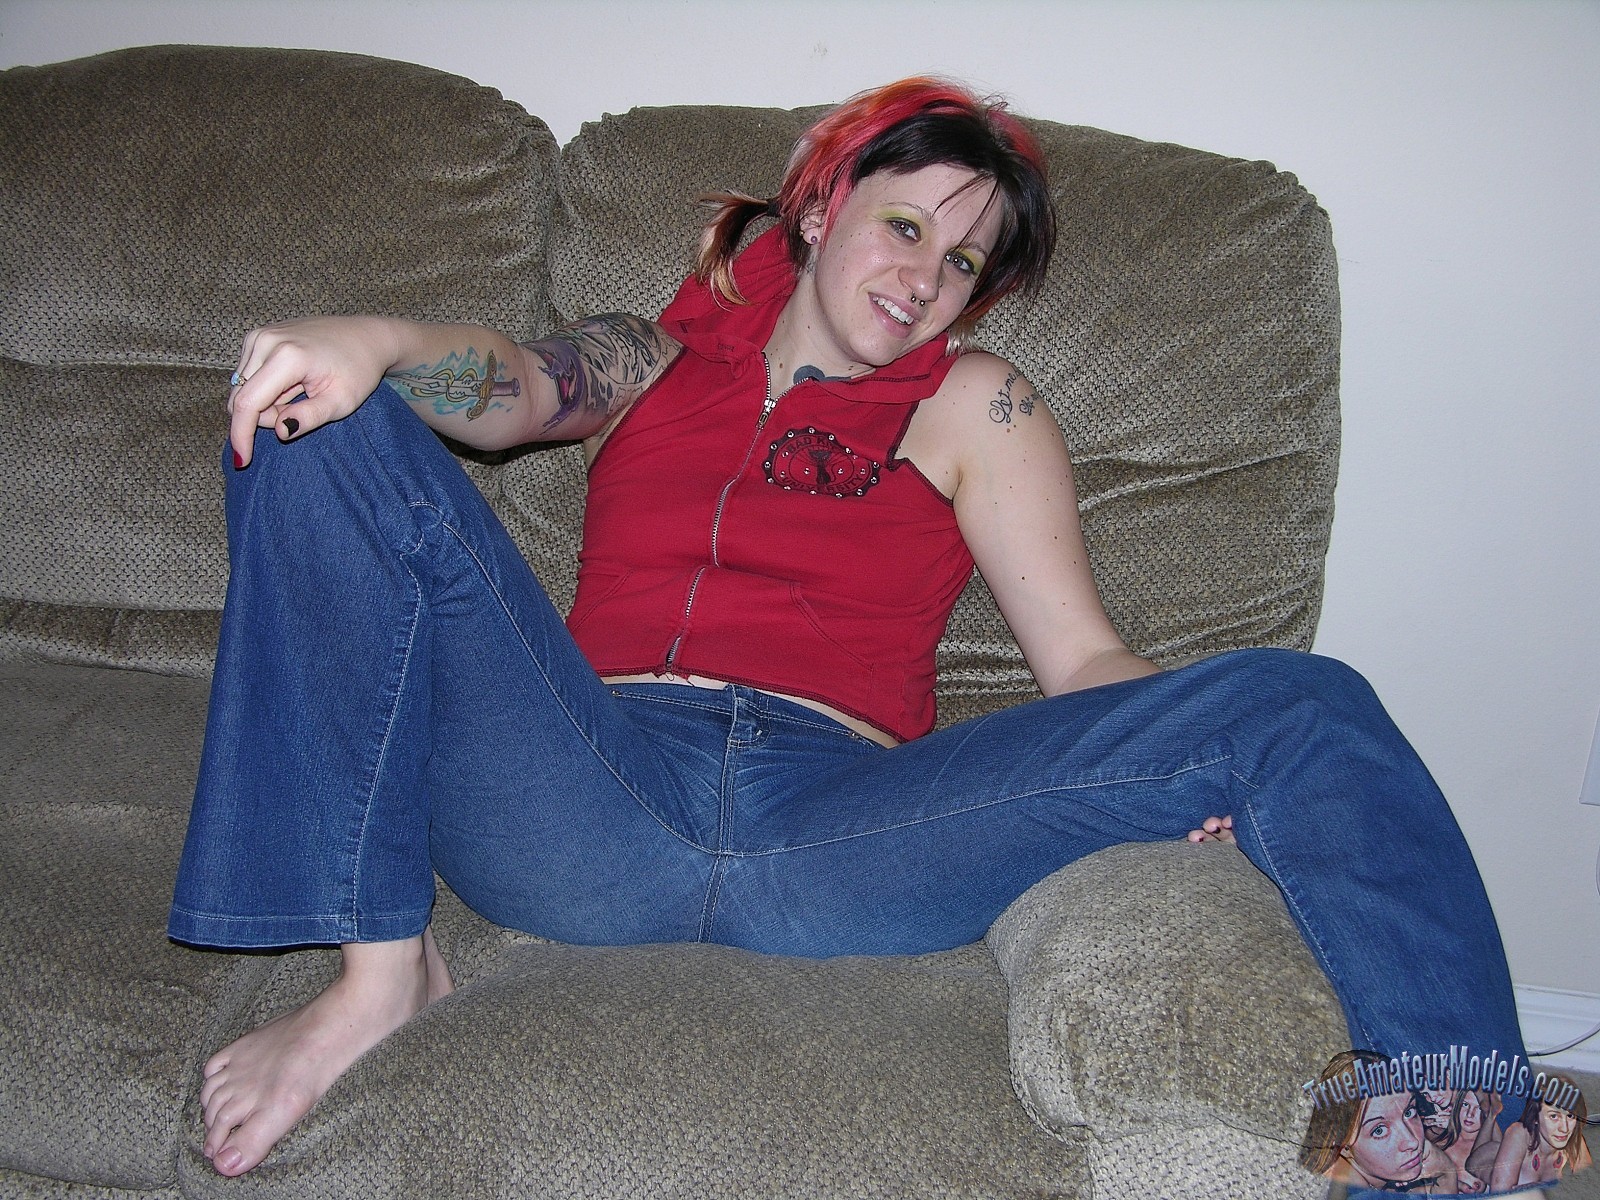 Tattooed Punk Rock Amateur Teen Shows Her Hairy Pink Asshole #67504388